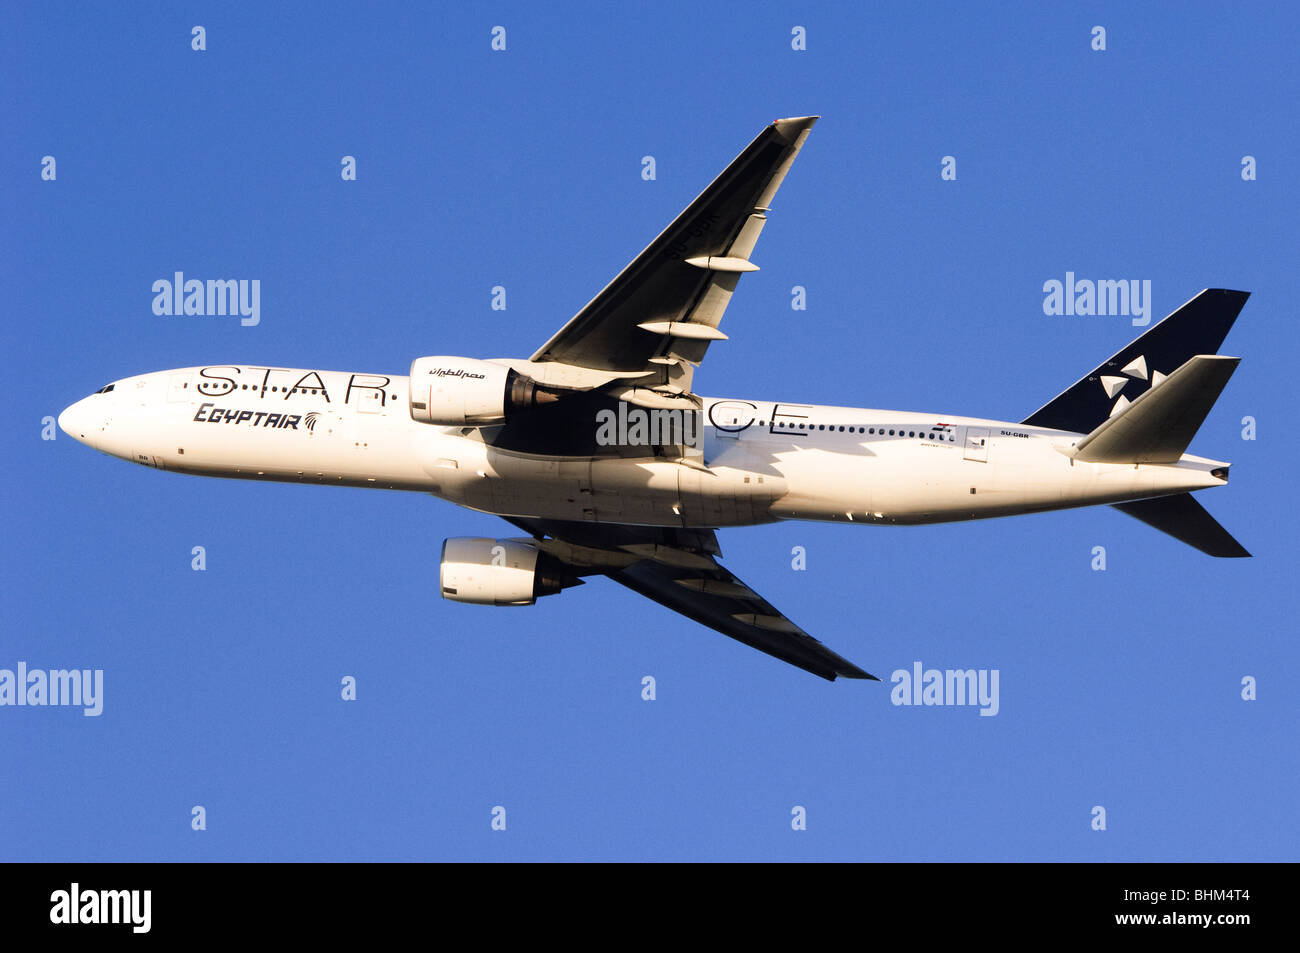 Boeing 777 operated by Star Alliance Egyptair climbing out from take off at London Heathrow Airport Stock Photo